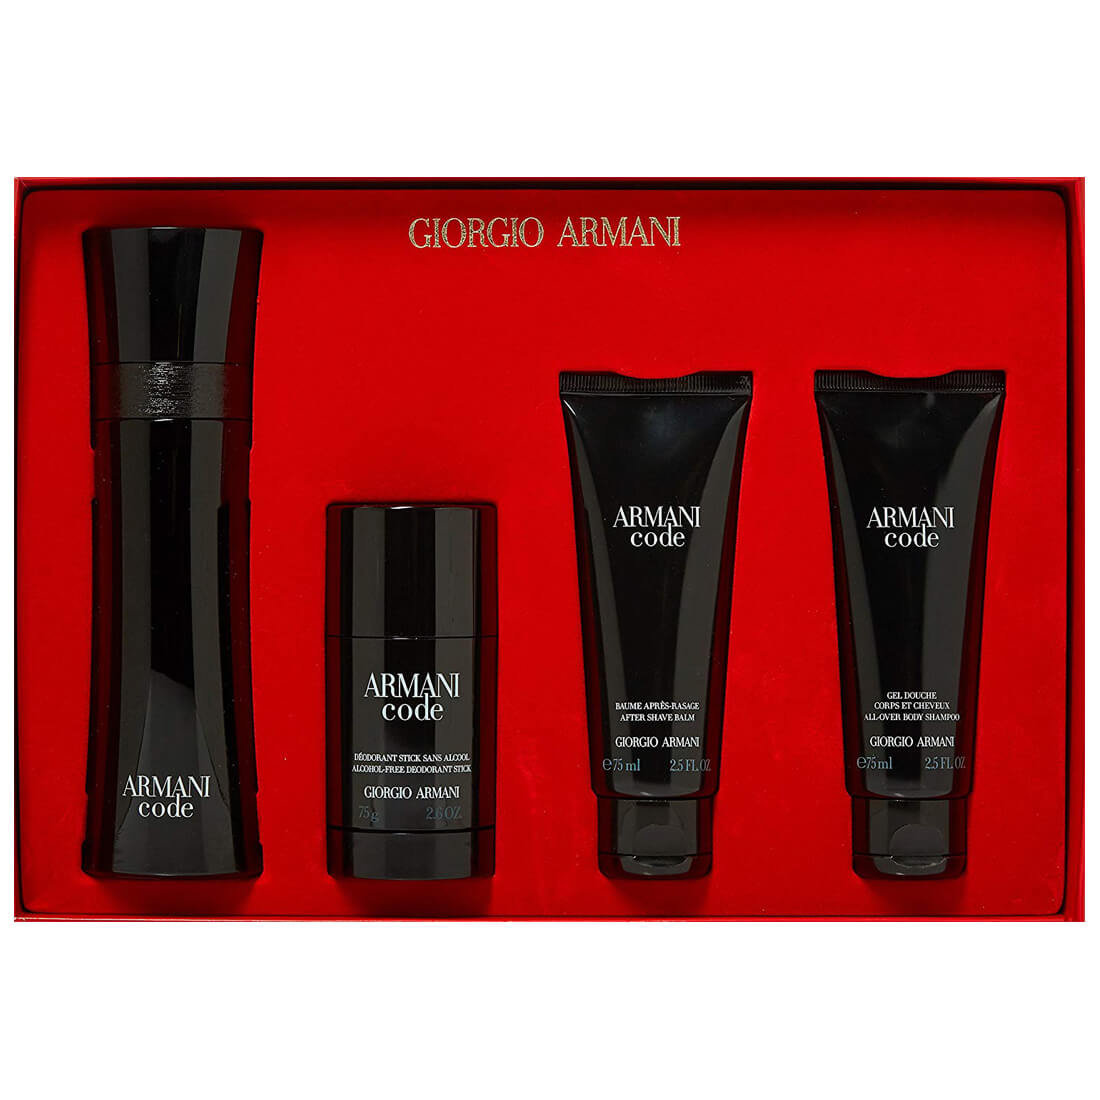 armani aftershave gift sets - 63% OFF 